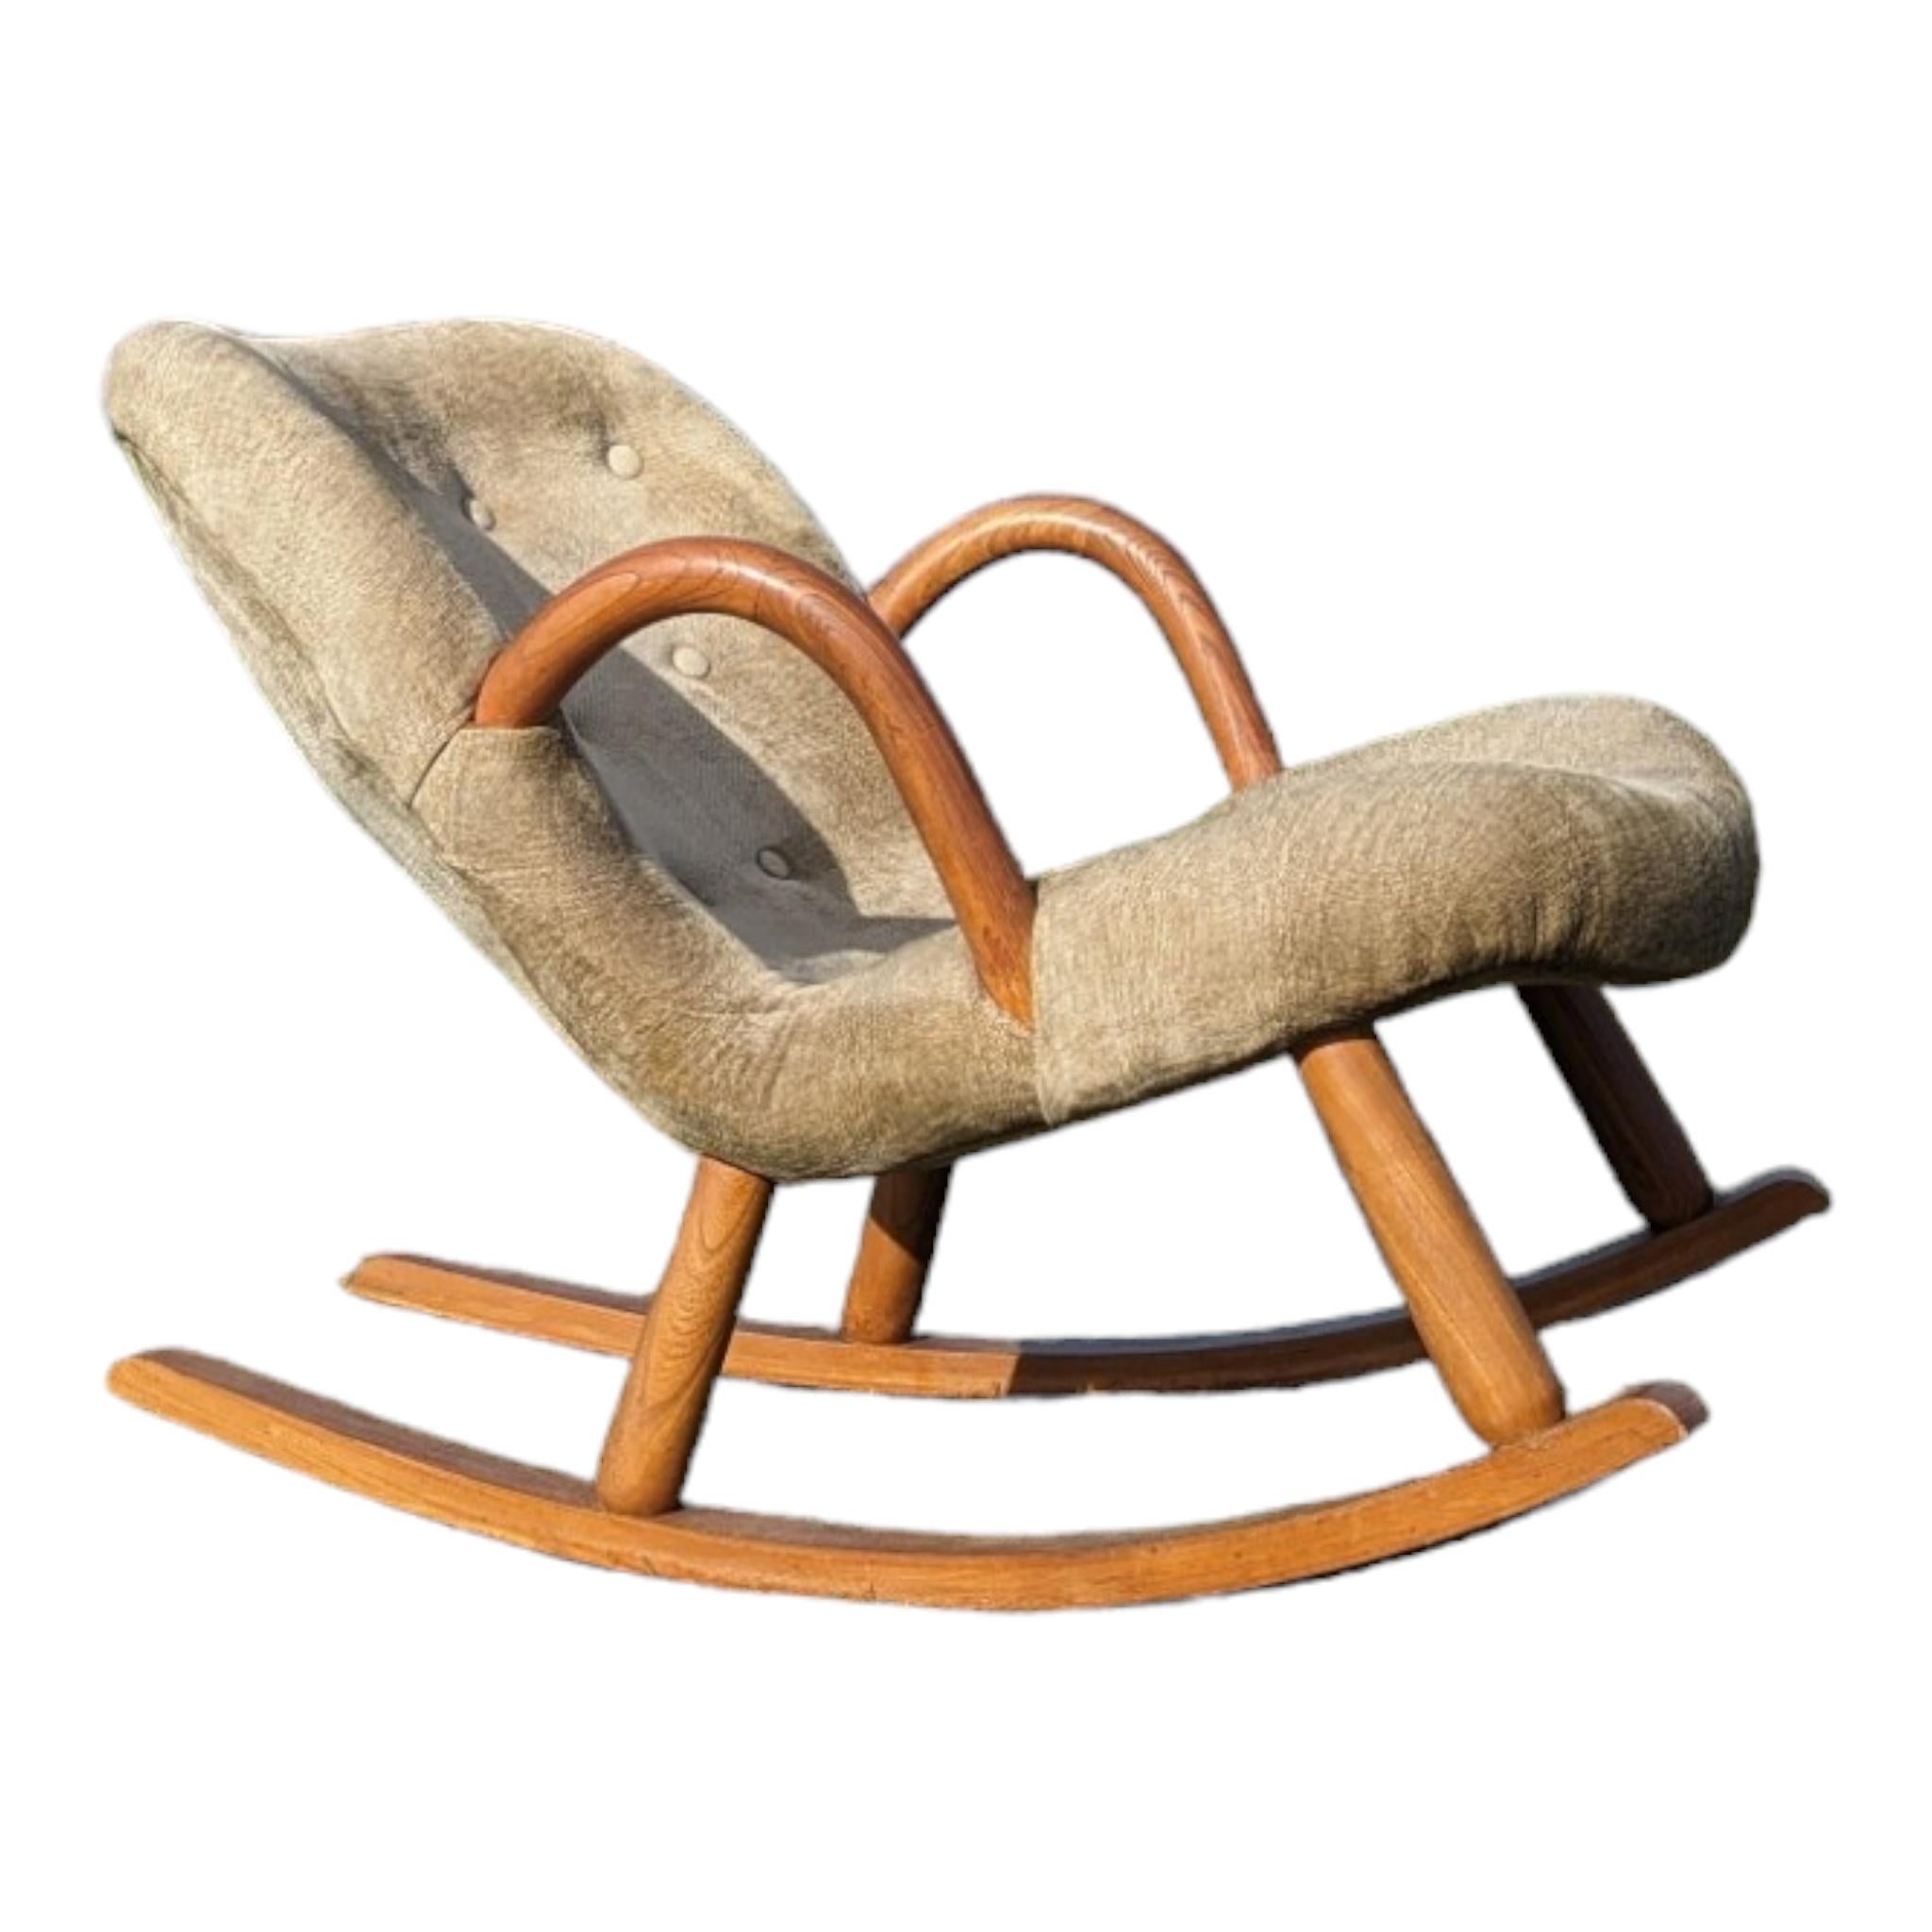 A rare circa 1960s rocking chair attributed to Arnold Masden as the designer. The wood and grain has beautiful colours/mix of light brown and gold throughout, featuring a solid Scandanavian birch or beech timber. Note this is not a new or remake